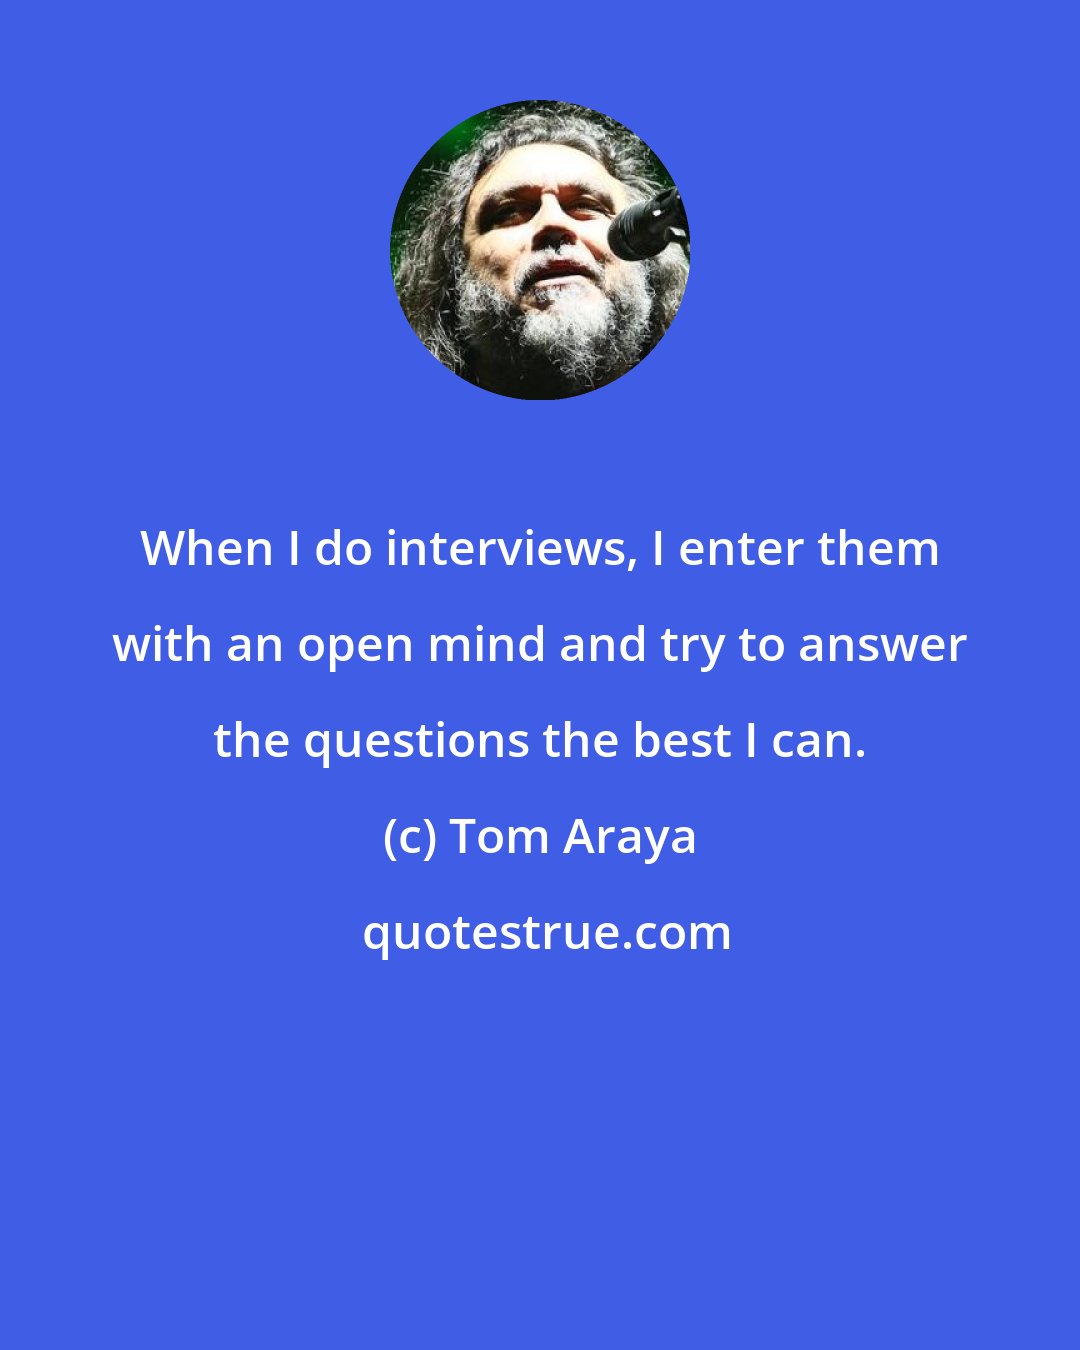 Tom Araya: When I do interviews, I enter them with an open mind and try to answer the questions the best I can.